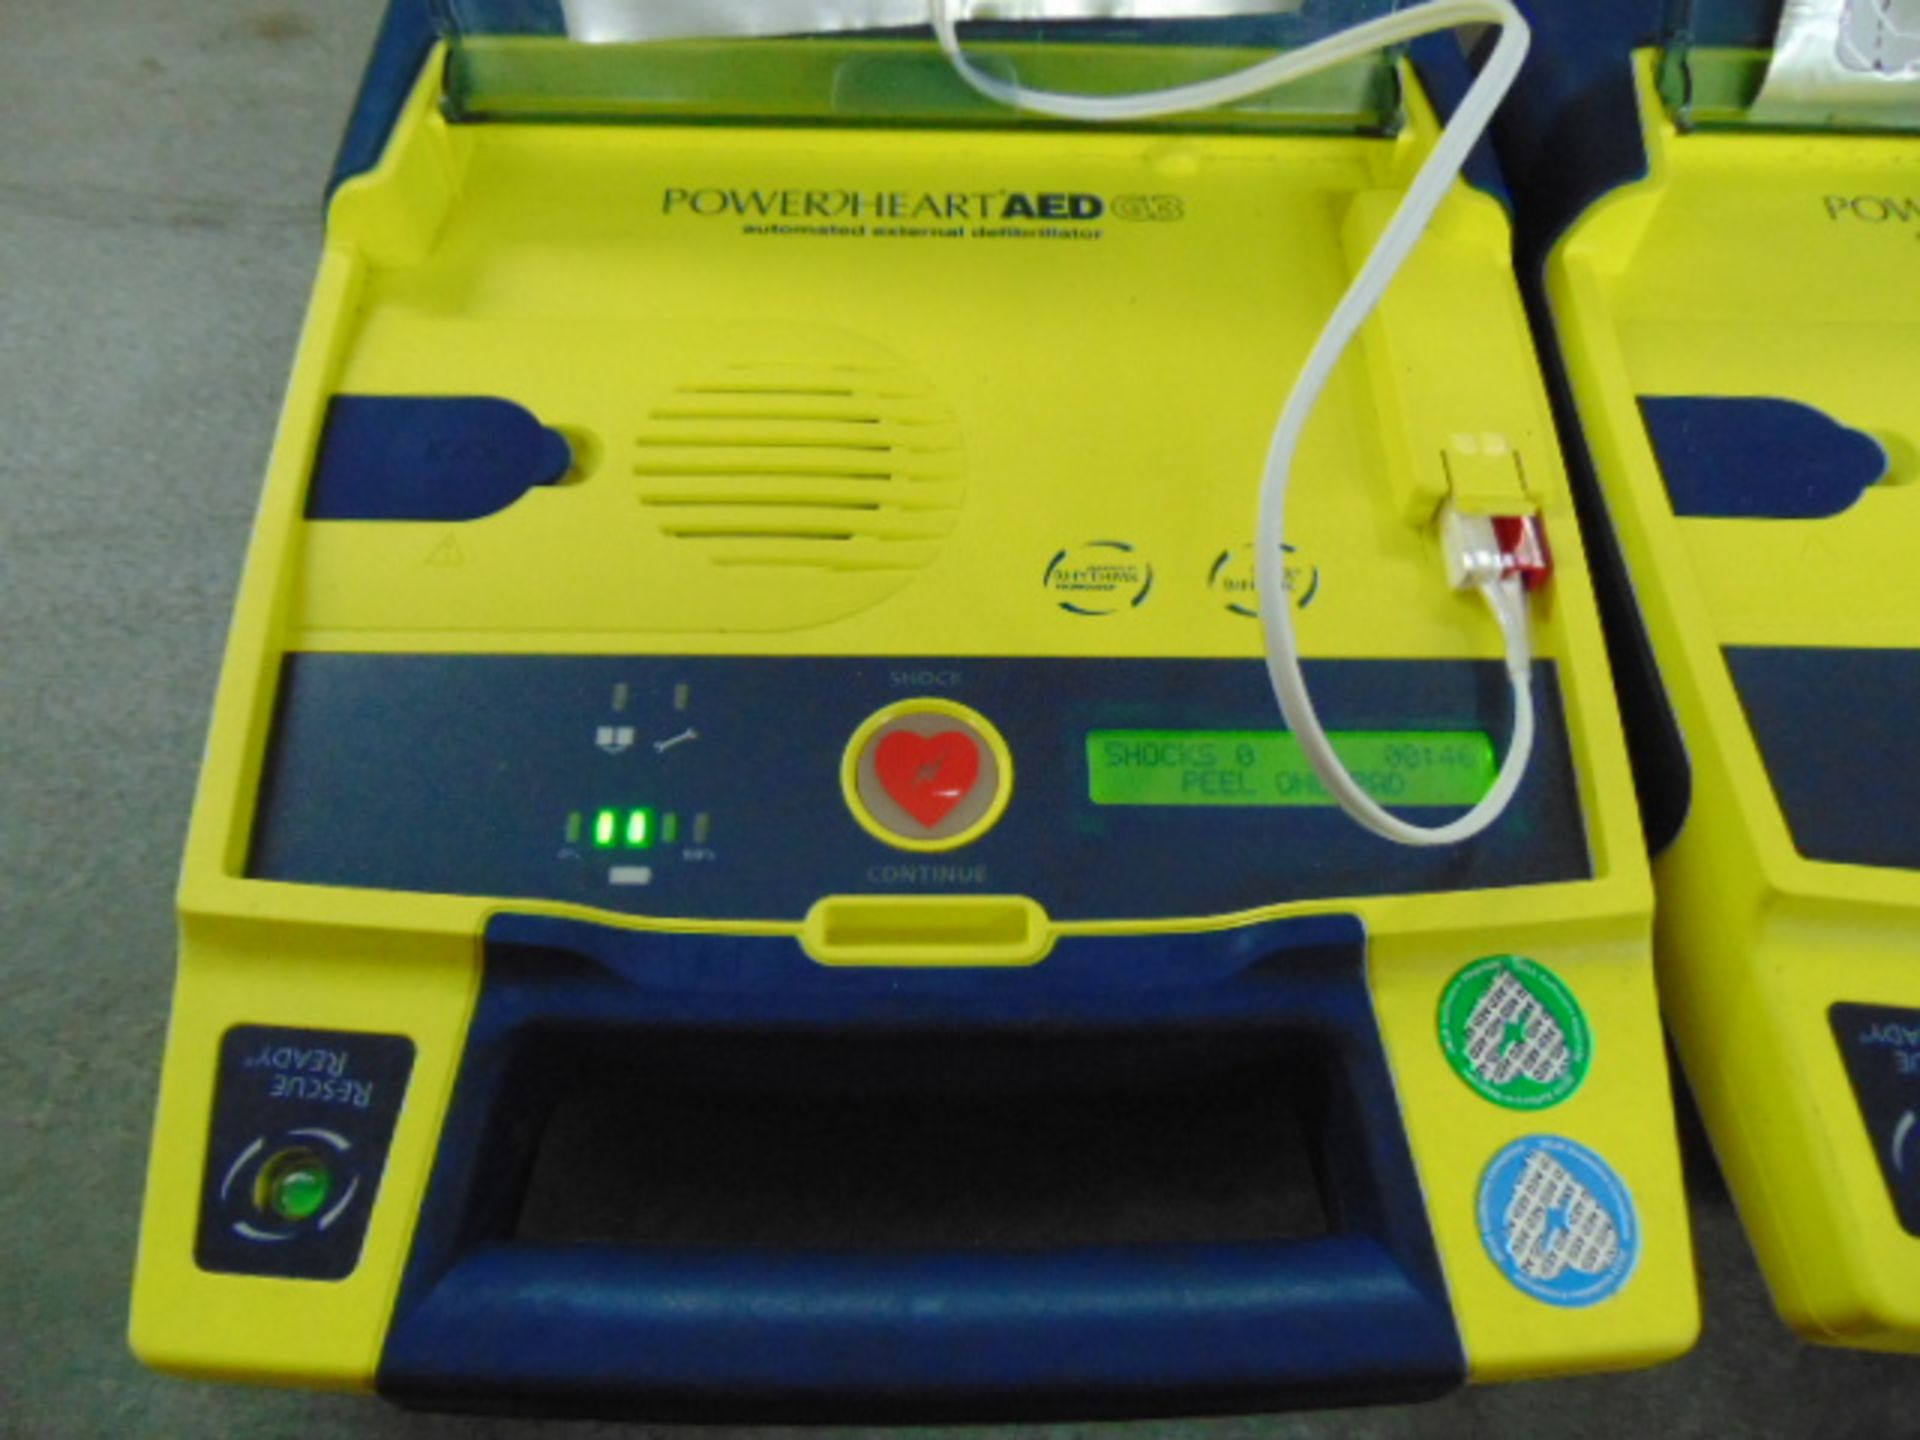 2 x Cardiac Science Powerheart G3 Automatic AED Automatic External Defribrillators - Image 3 of 12